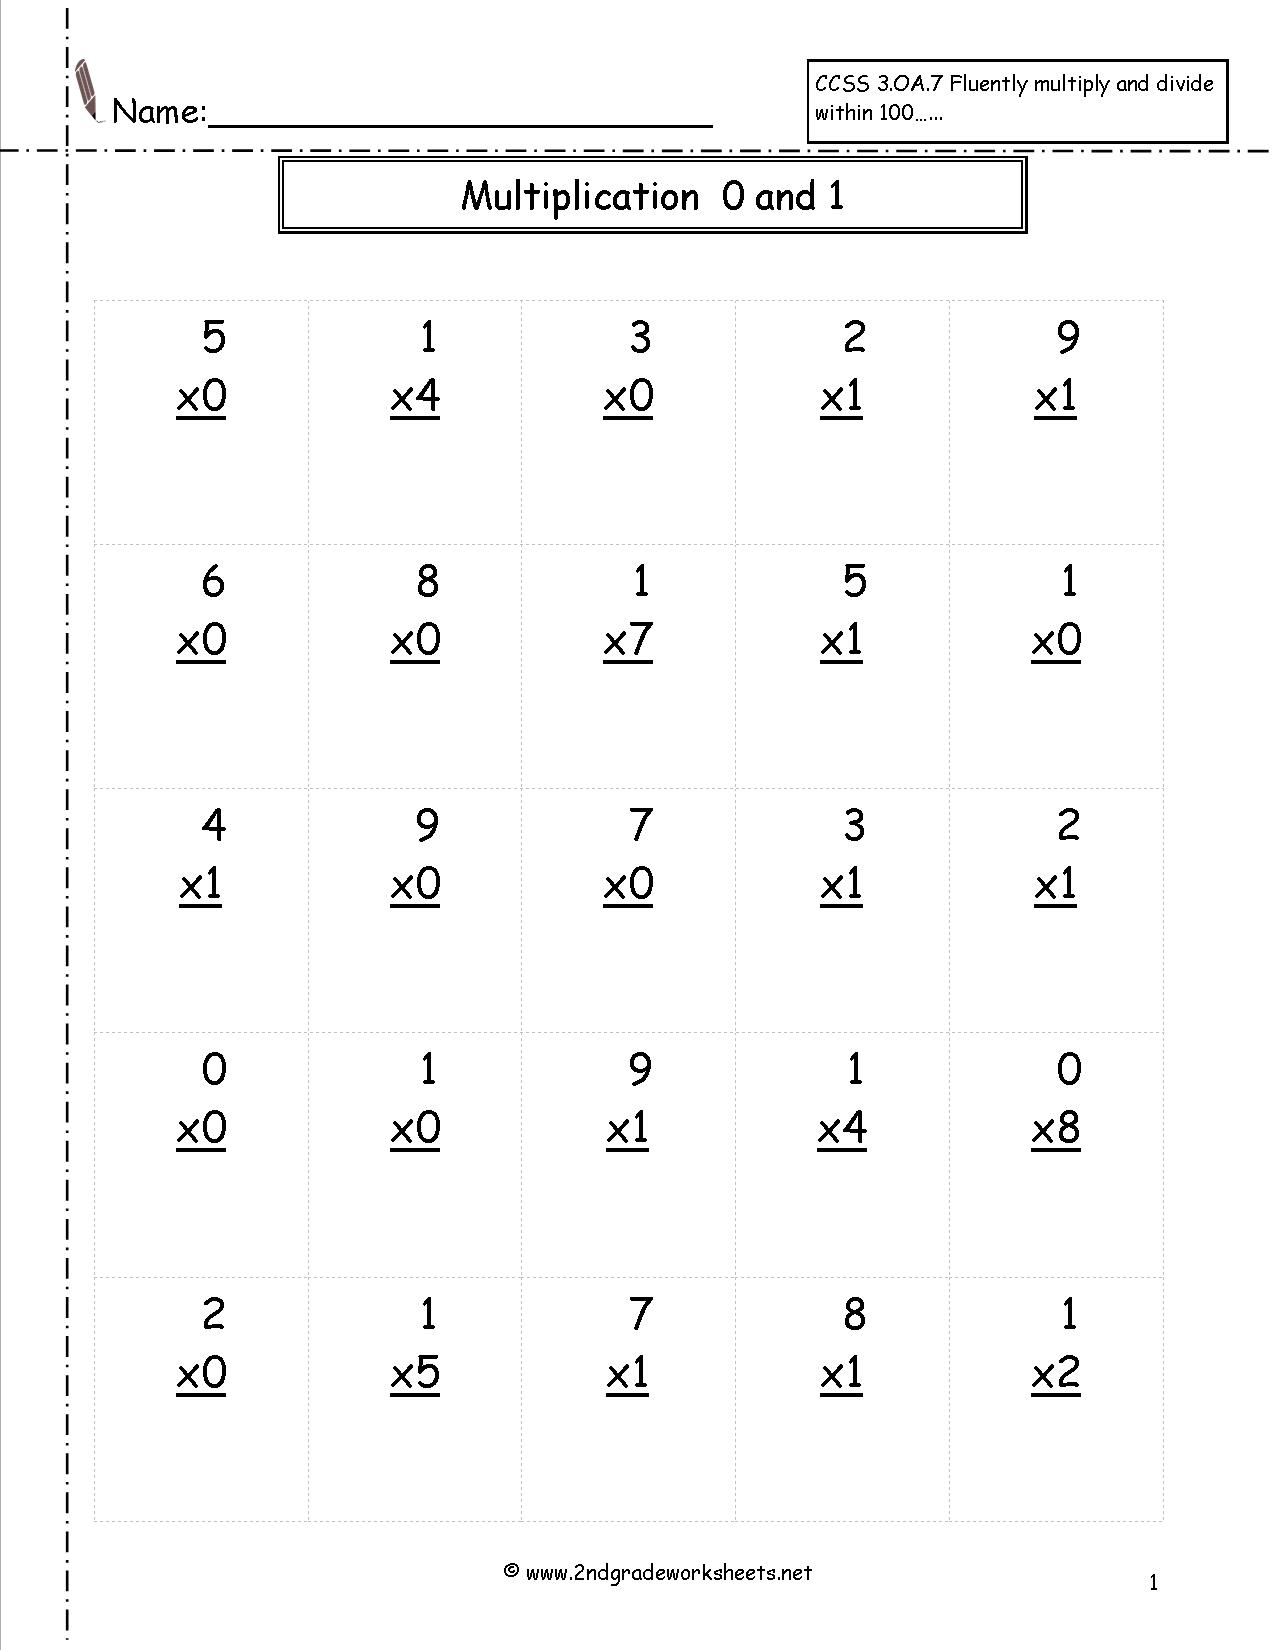 Multiplication Worksheets And Printouts intended for Printable Multiplication Worksheets